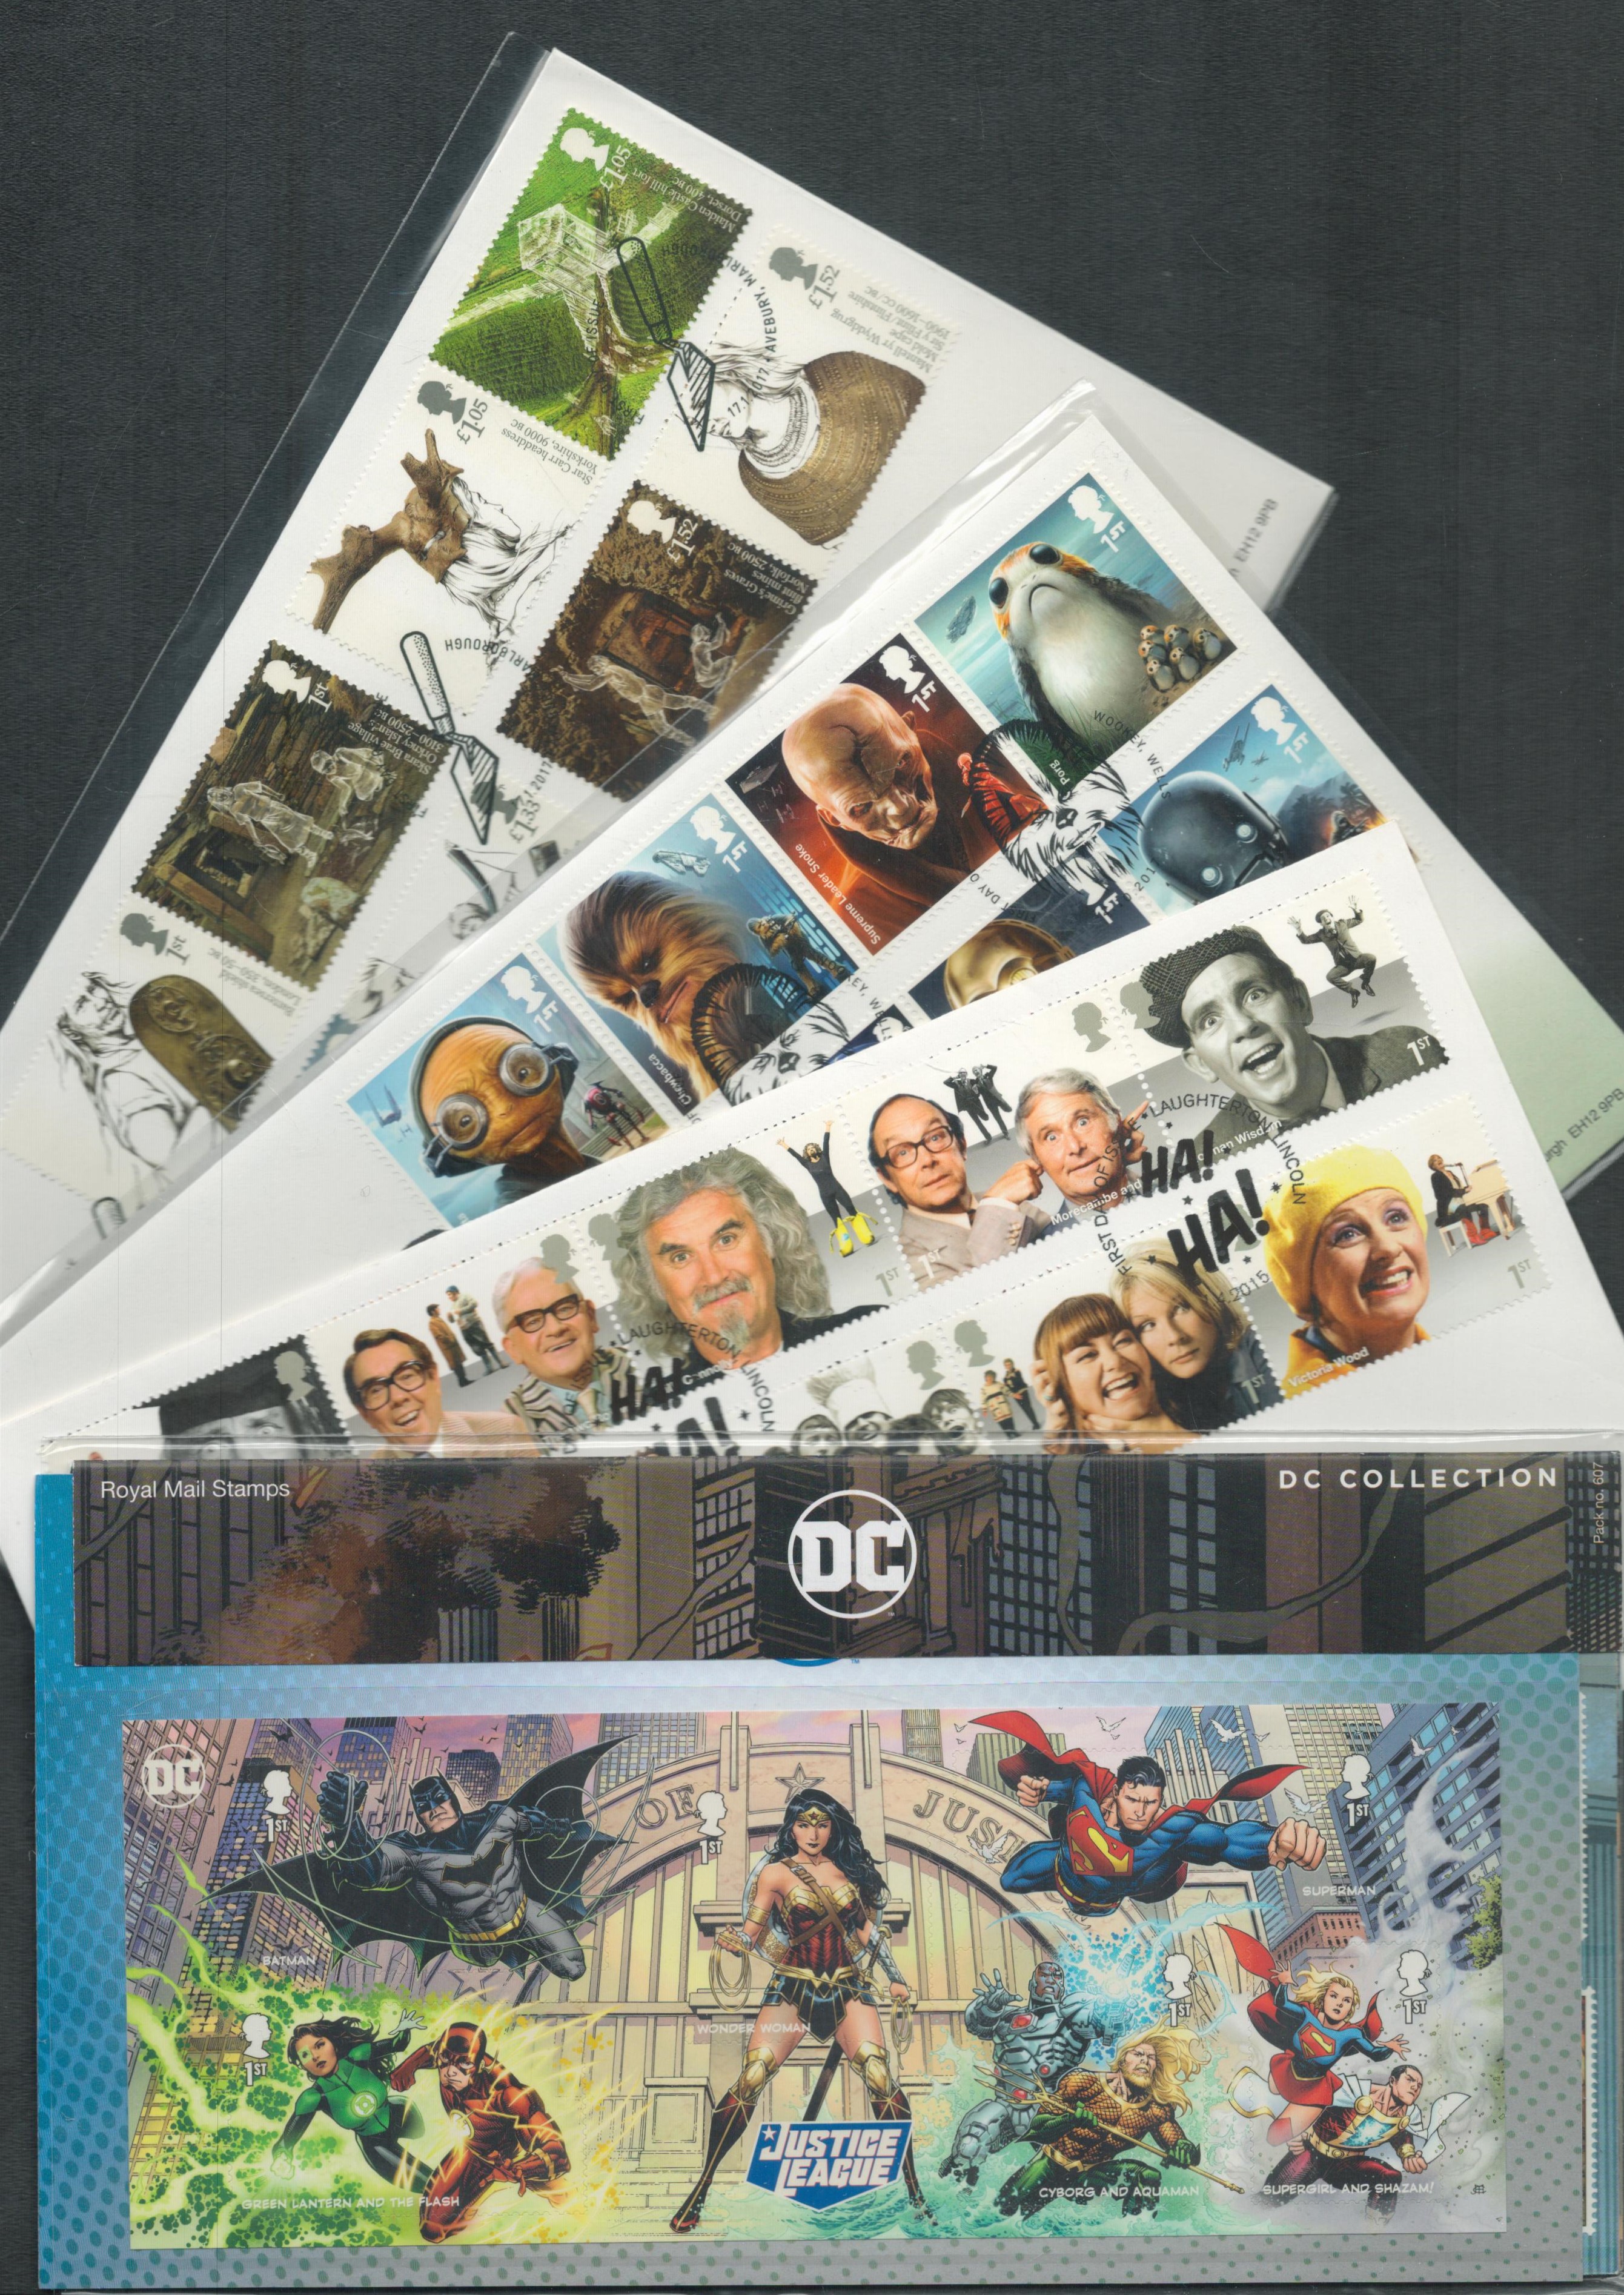 First Day Cover collection includes Comedy greats 2015, DC Justice League, Star Wars 2017 and